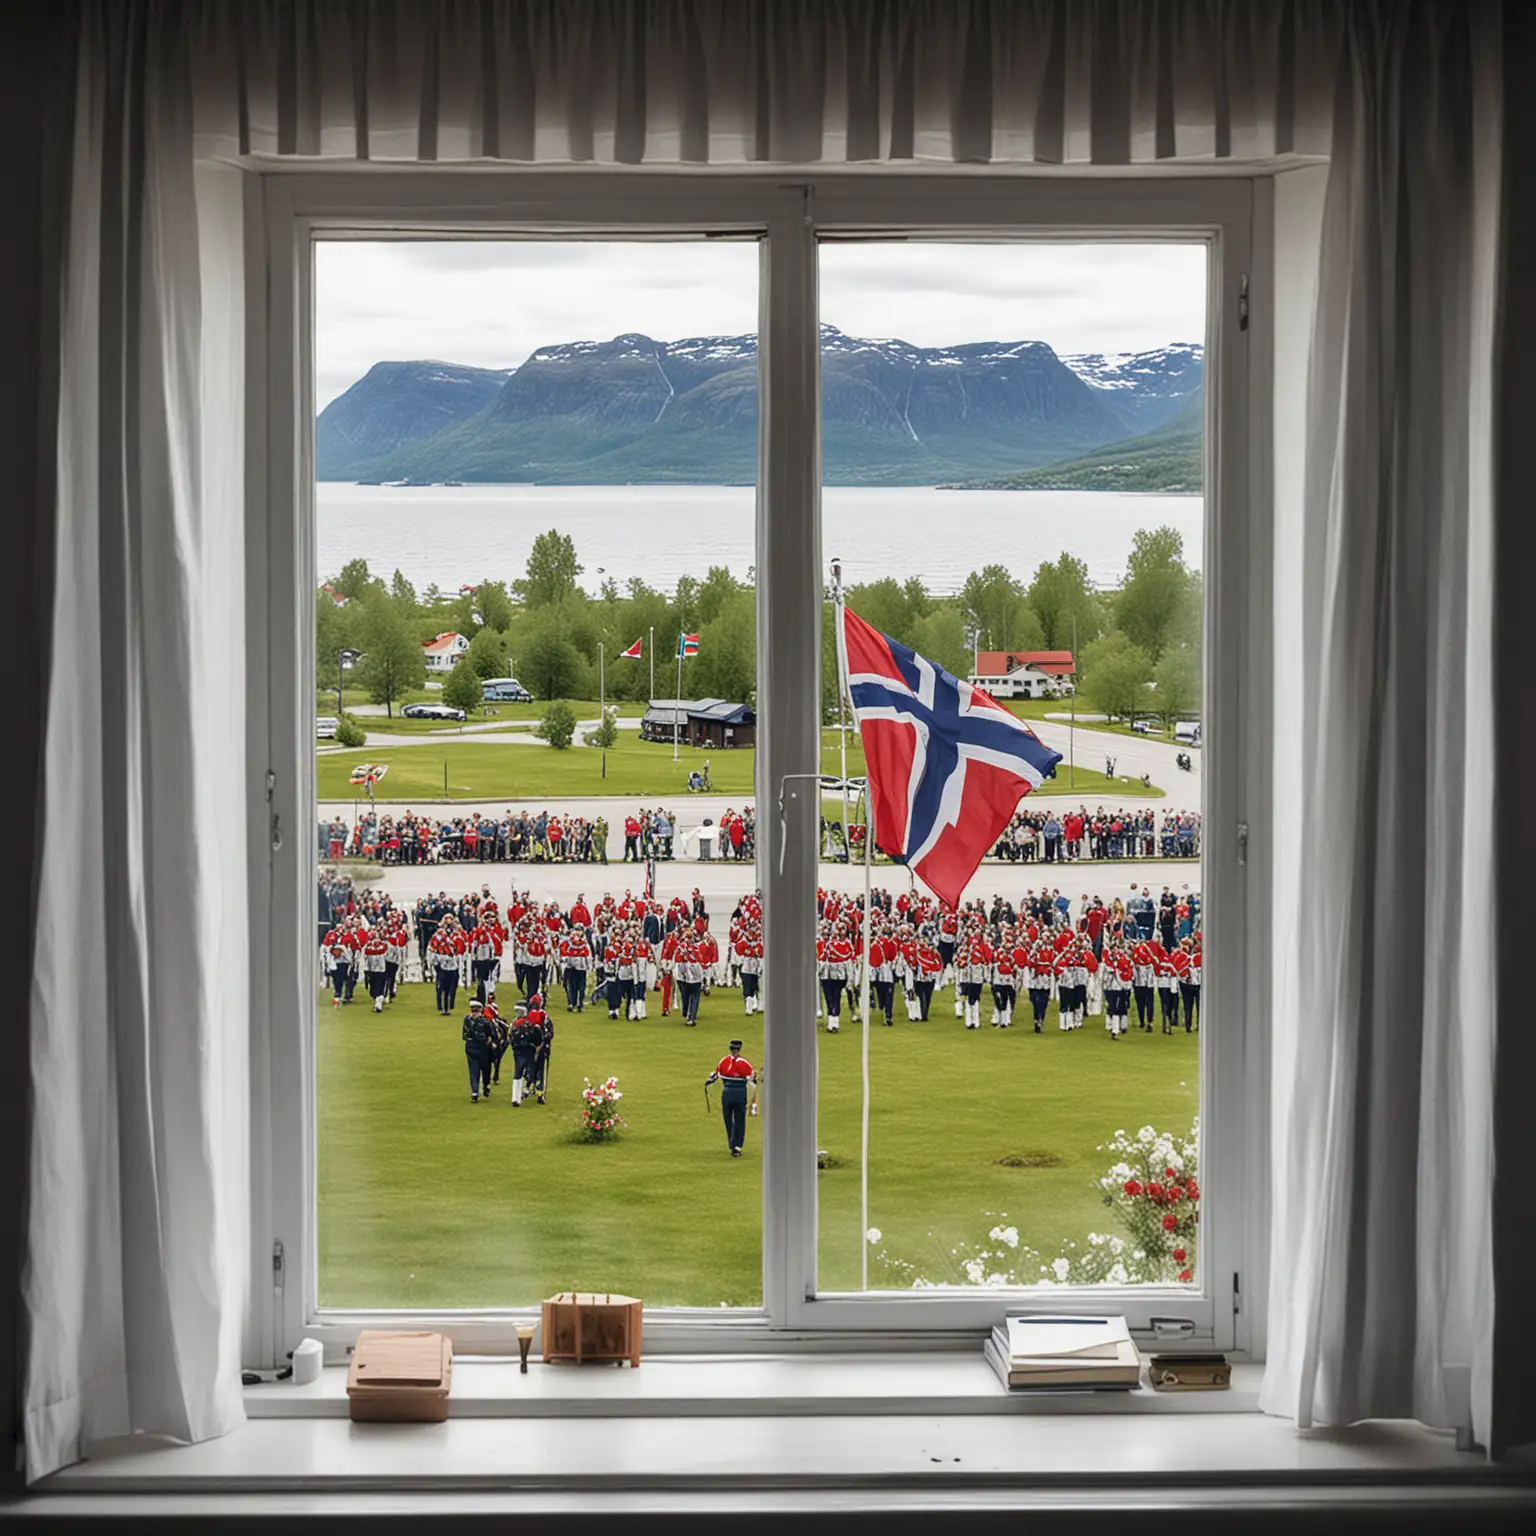 Norwegian Flag Parade Viewed from Living Room Window